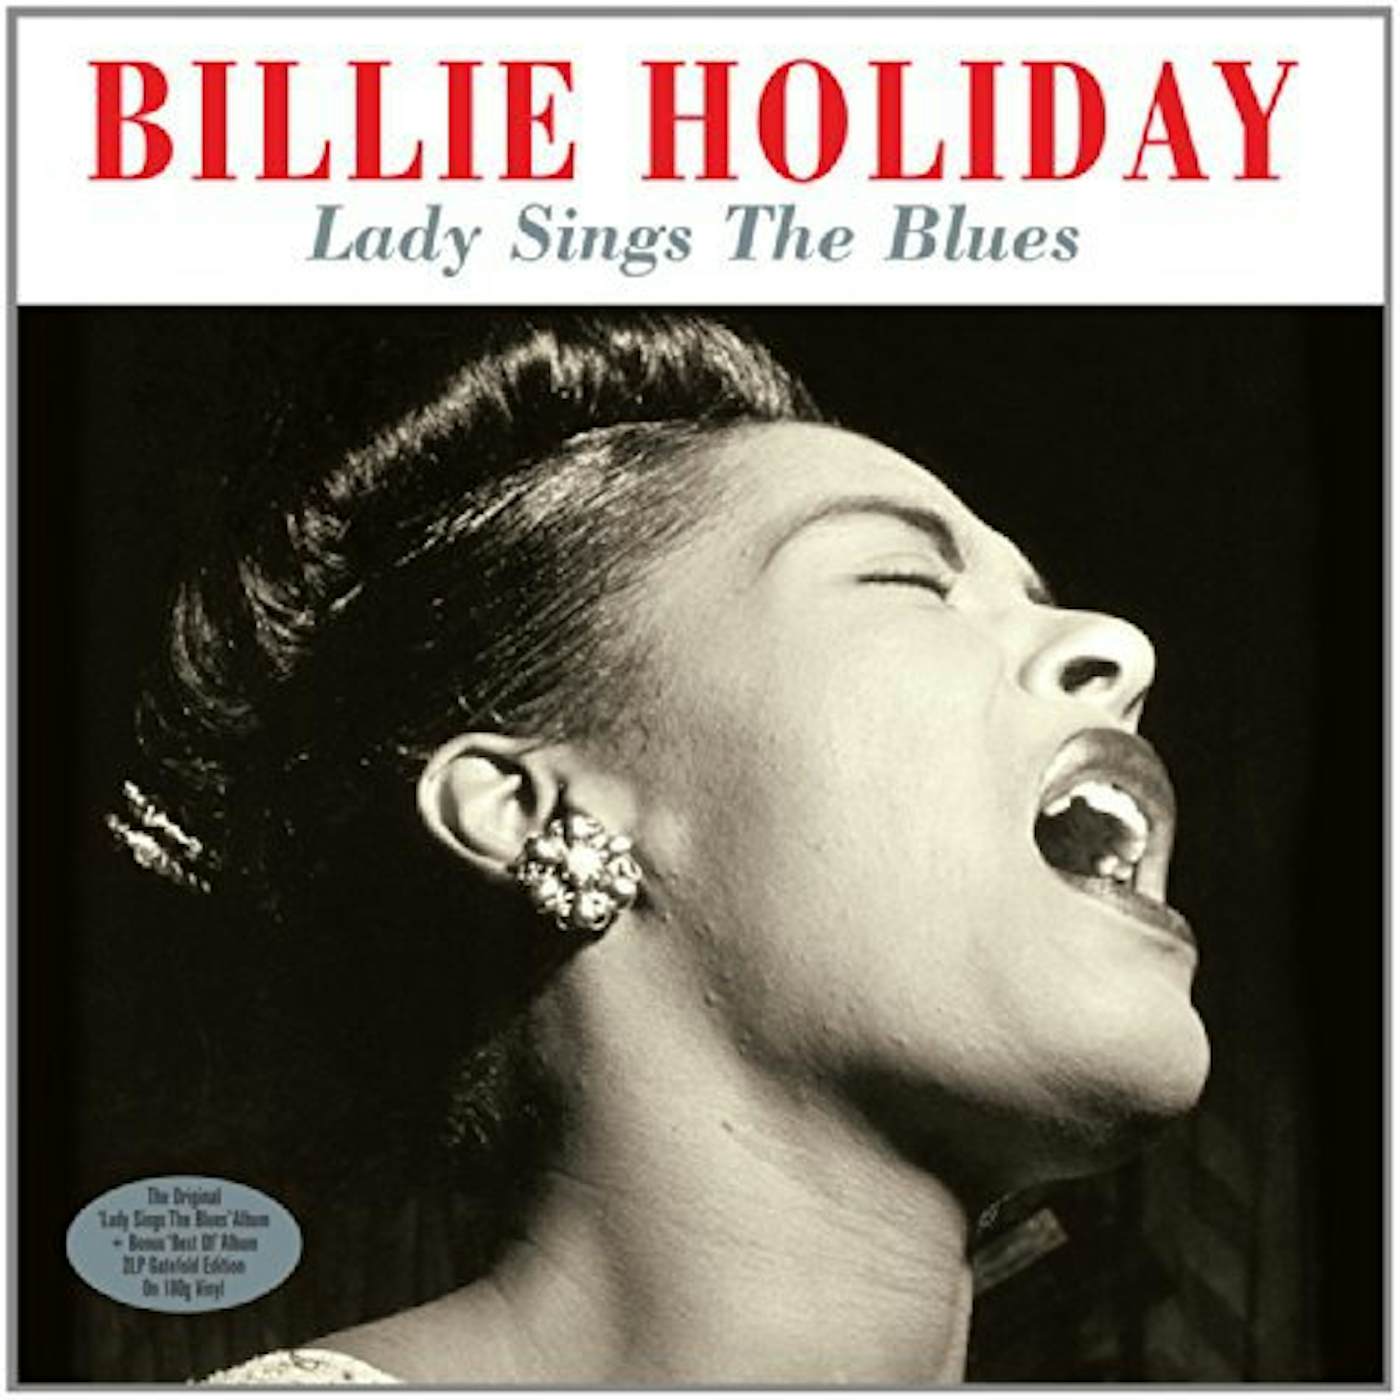 Billie Holiday Lady Sings The Blues Vinyl Record